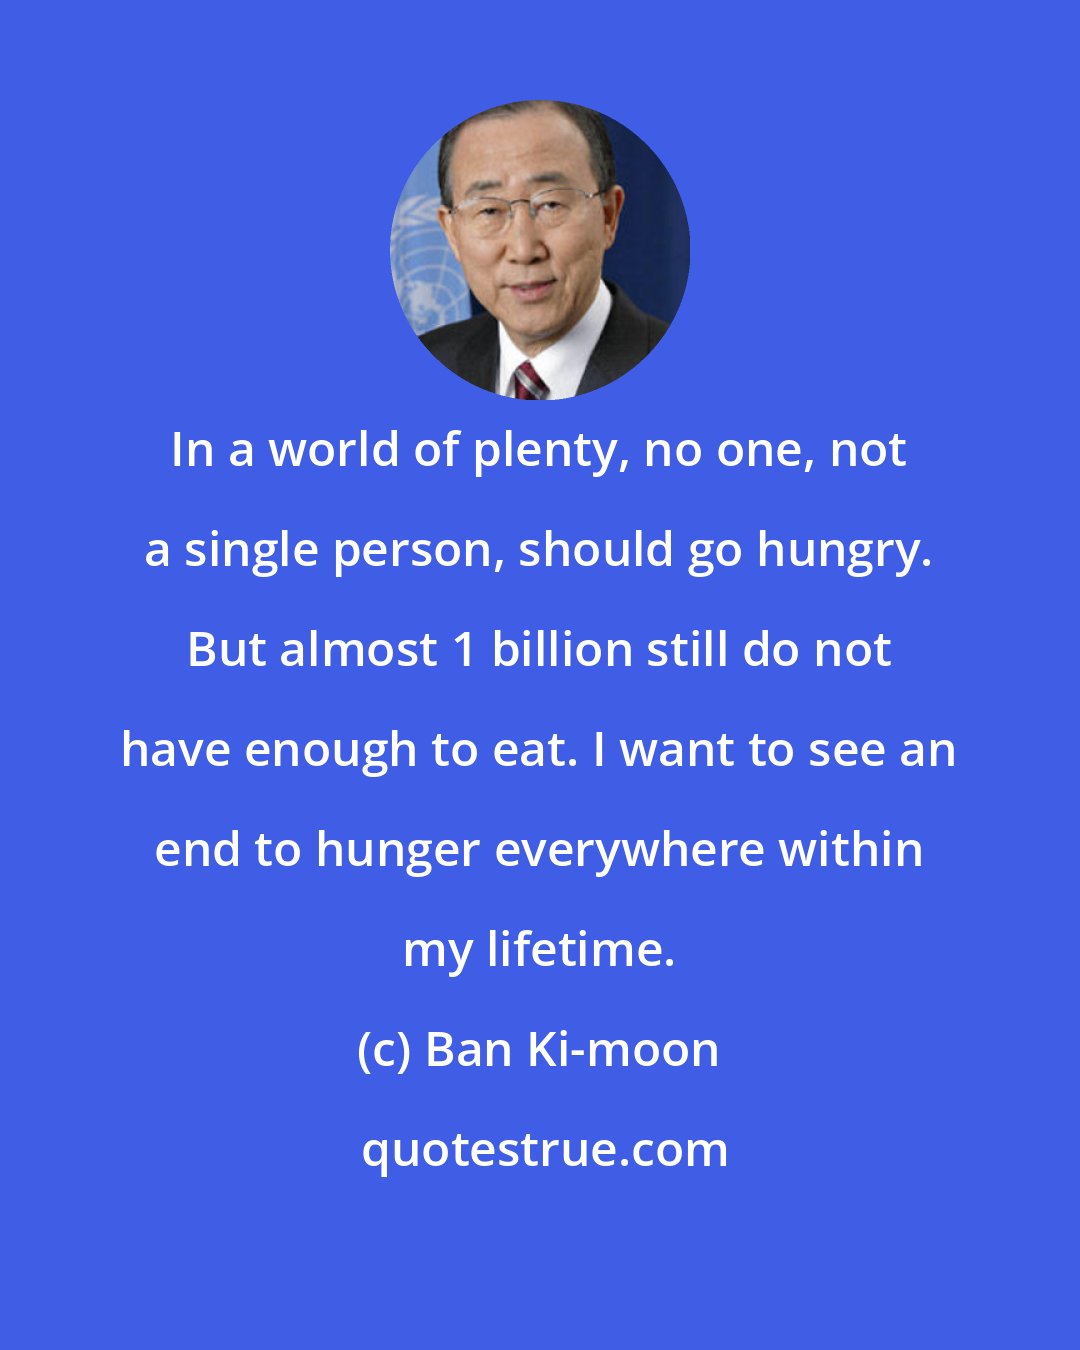 Ban Ki-moon: In a world of plenty, no one, not a single person, should go hungry. But almost 1 billion still do not have enough to eat. I want to see an end to hunger everywhere within my lifetime.